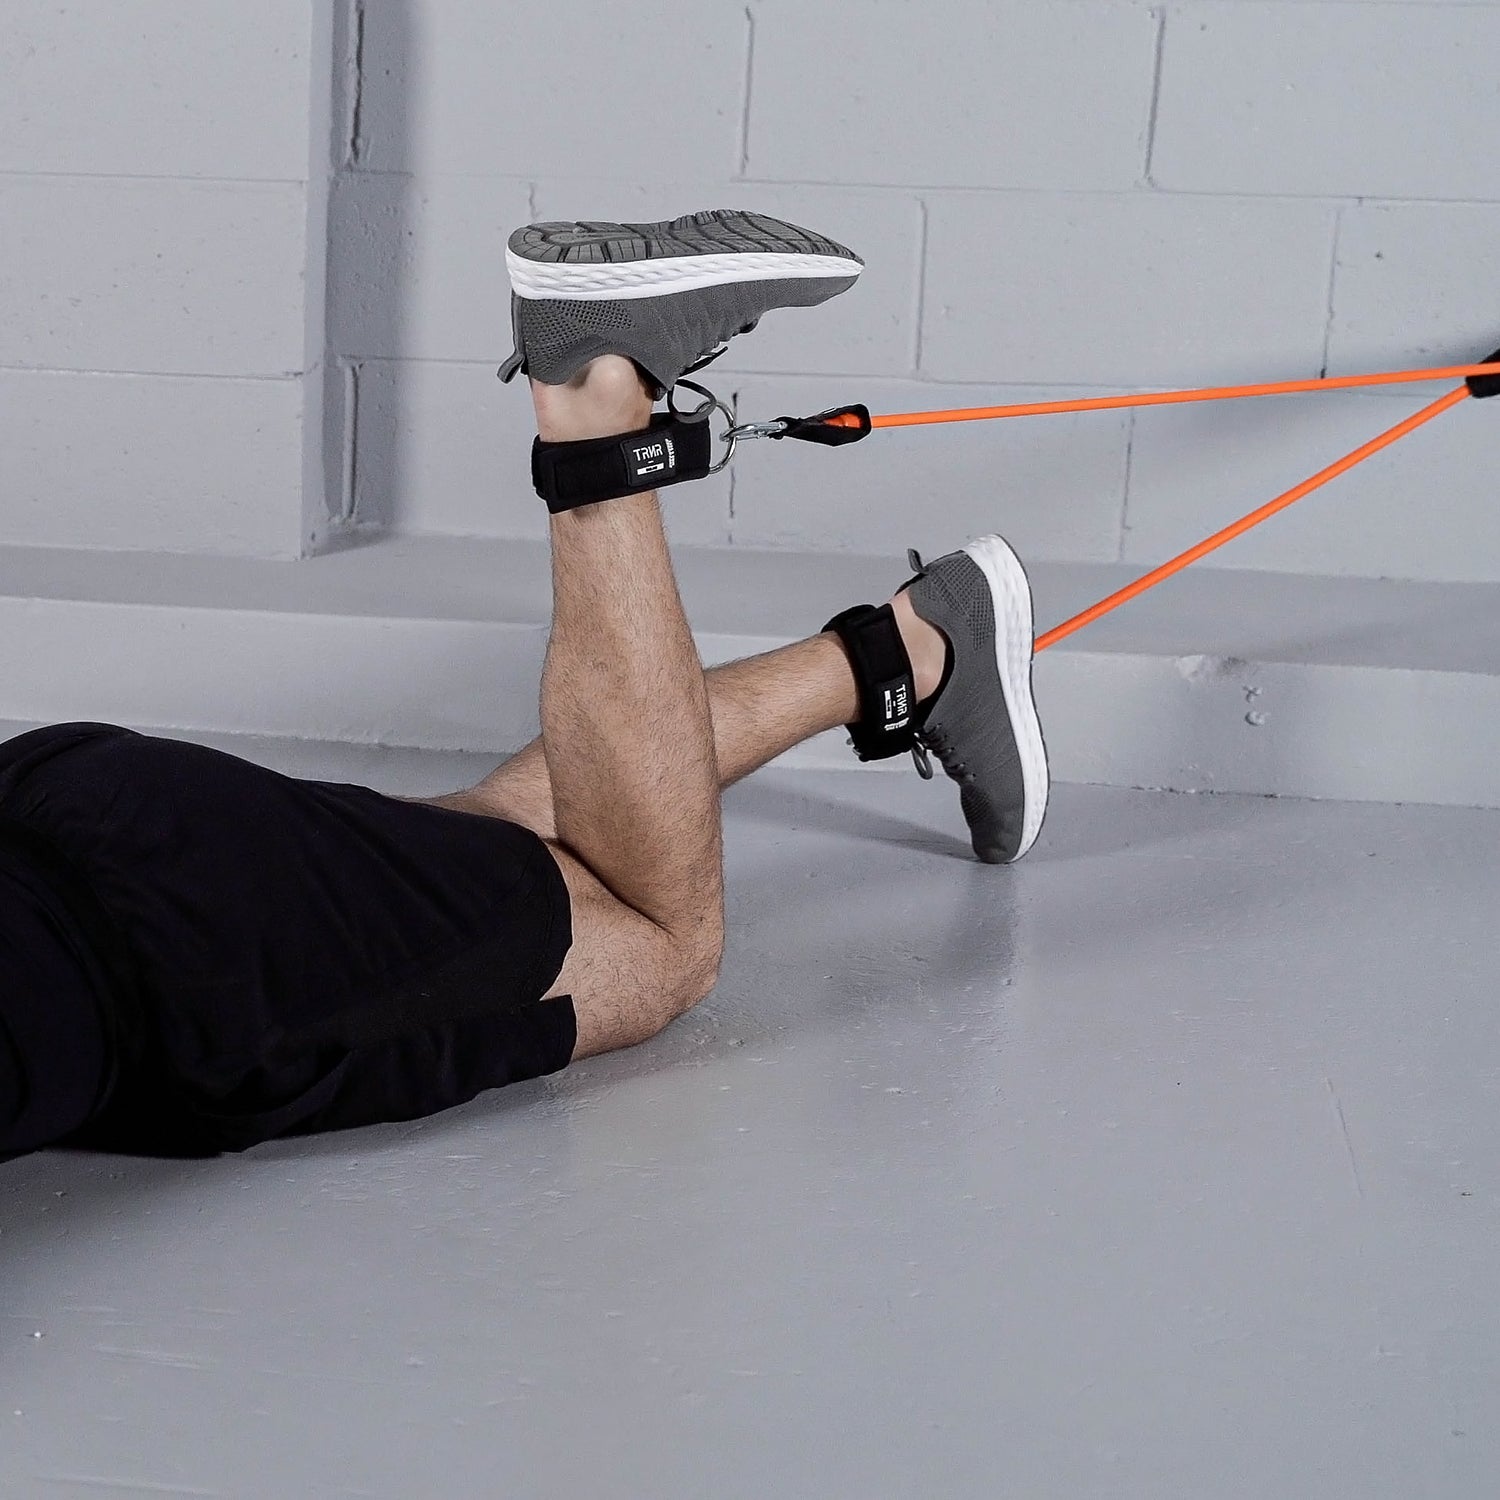 Lower Body Exercise Using the TRNR X7 Resistance System